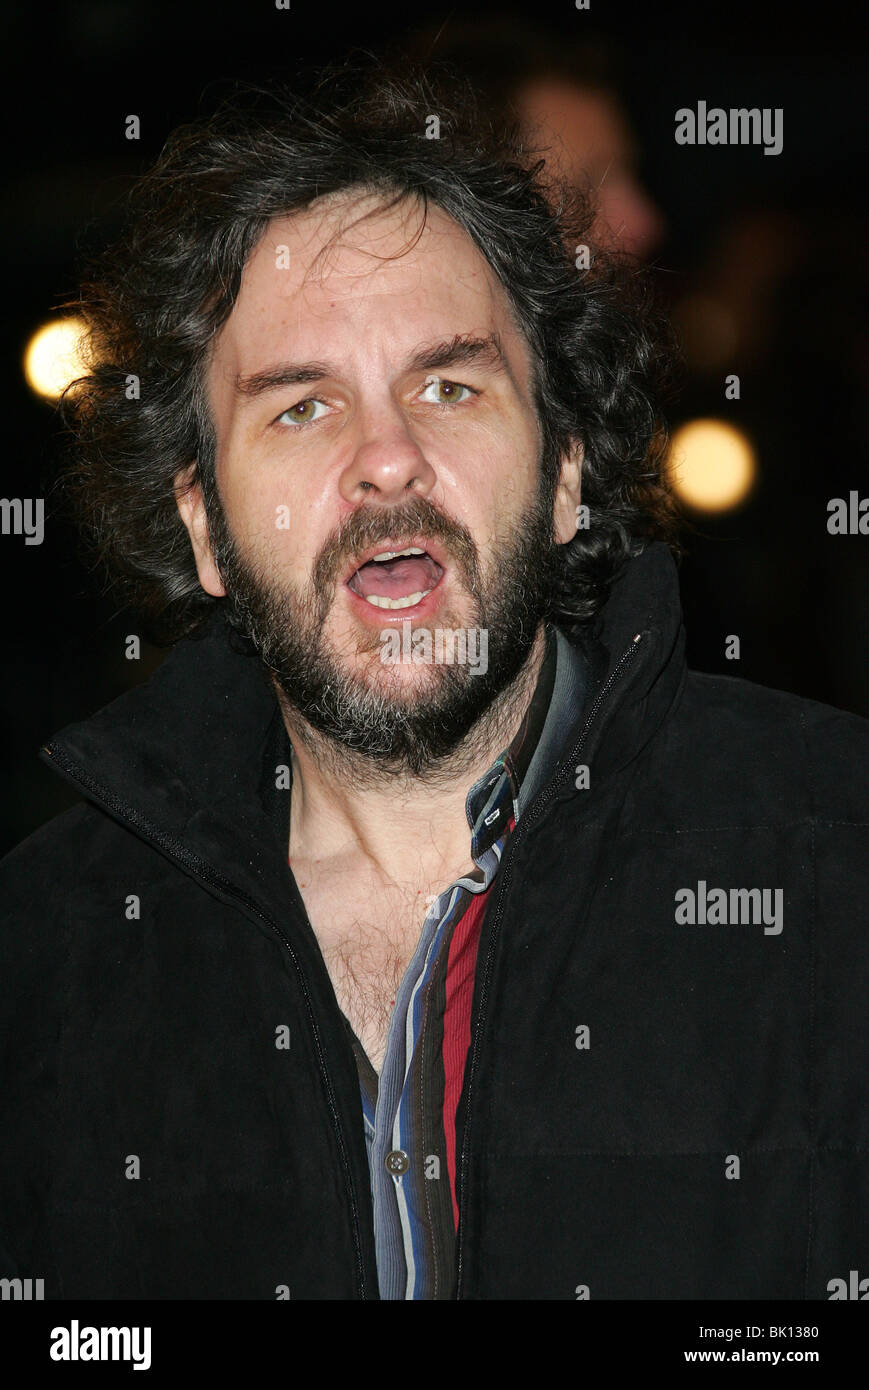 PETER JACKSON KING KONG FILM PREMIER Odeon Leicester Square Londra Inghilterra 08 Dicembre 2005 Foto Stock